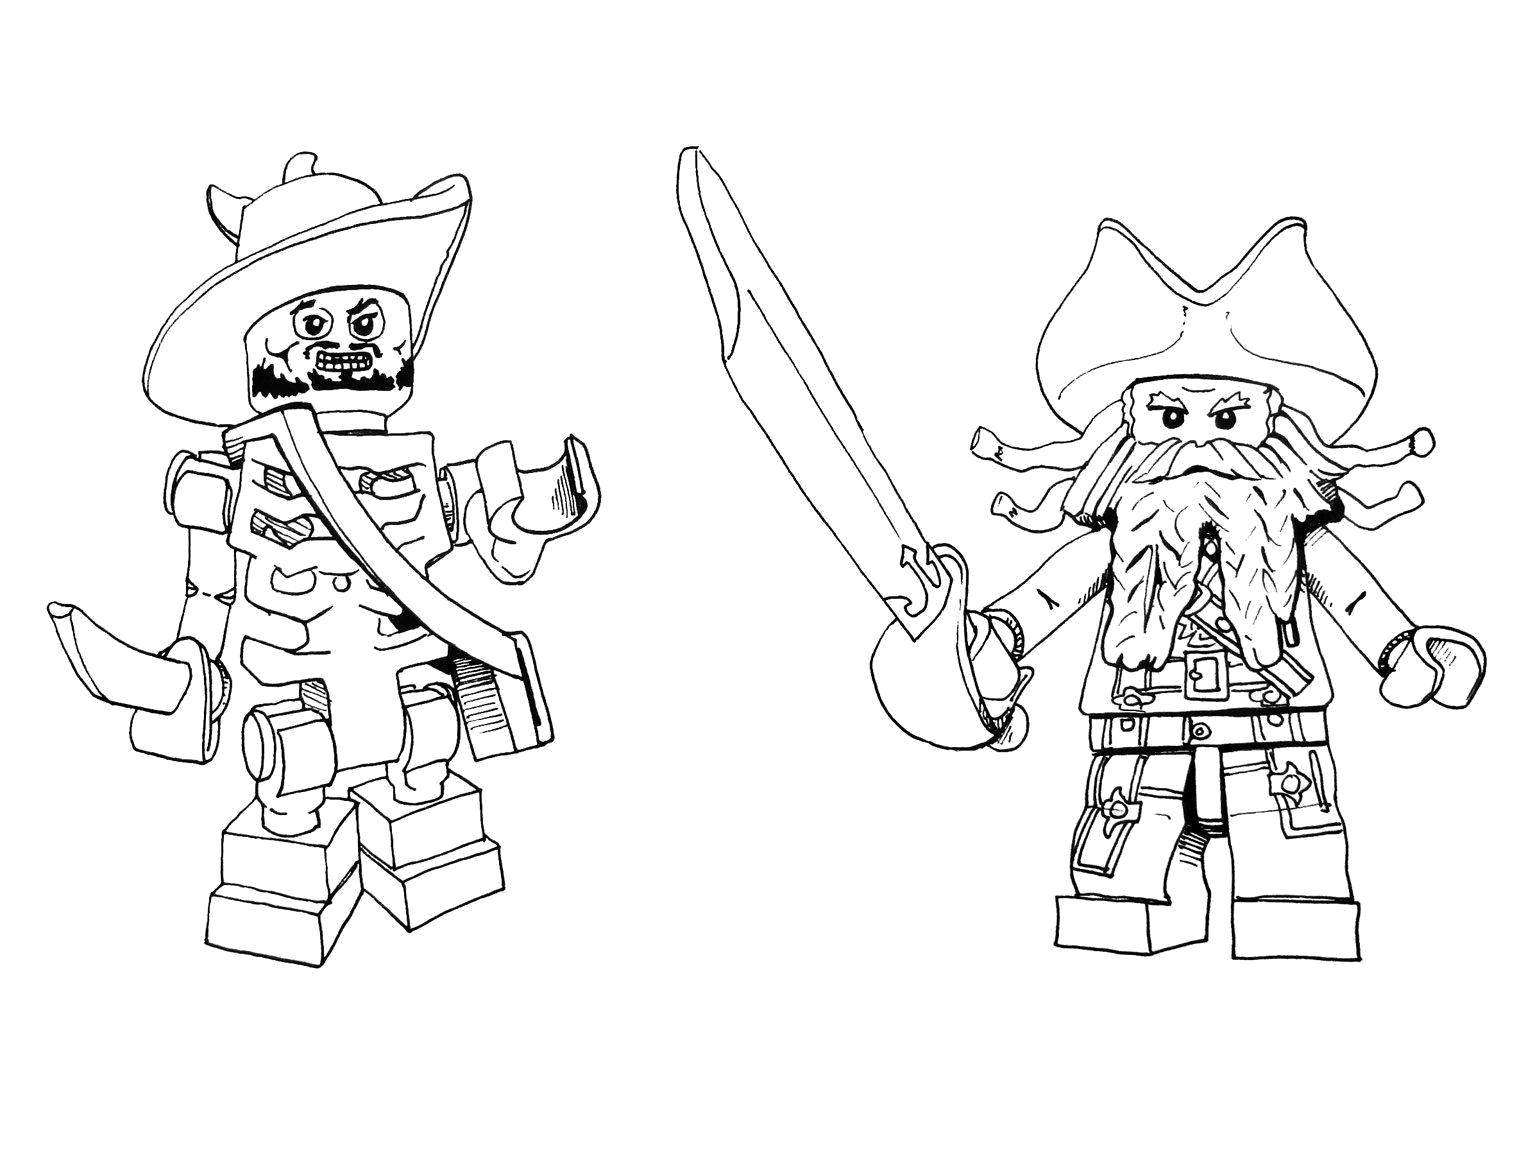 Coloring Pirates from LEGO. Category LEGO. Tags:  Designer, LEGO.